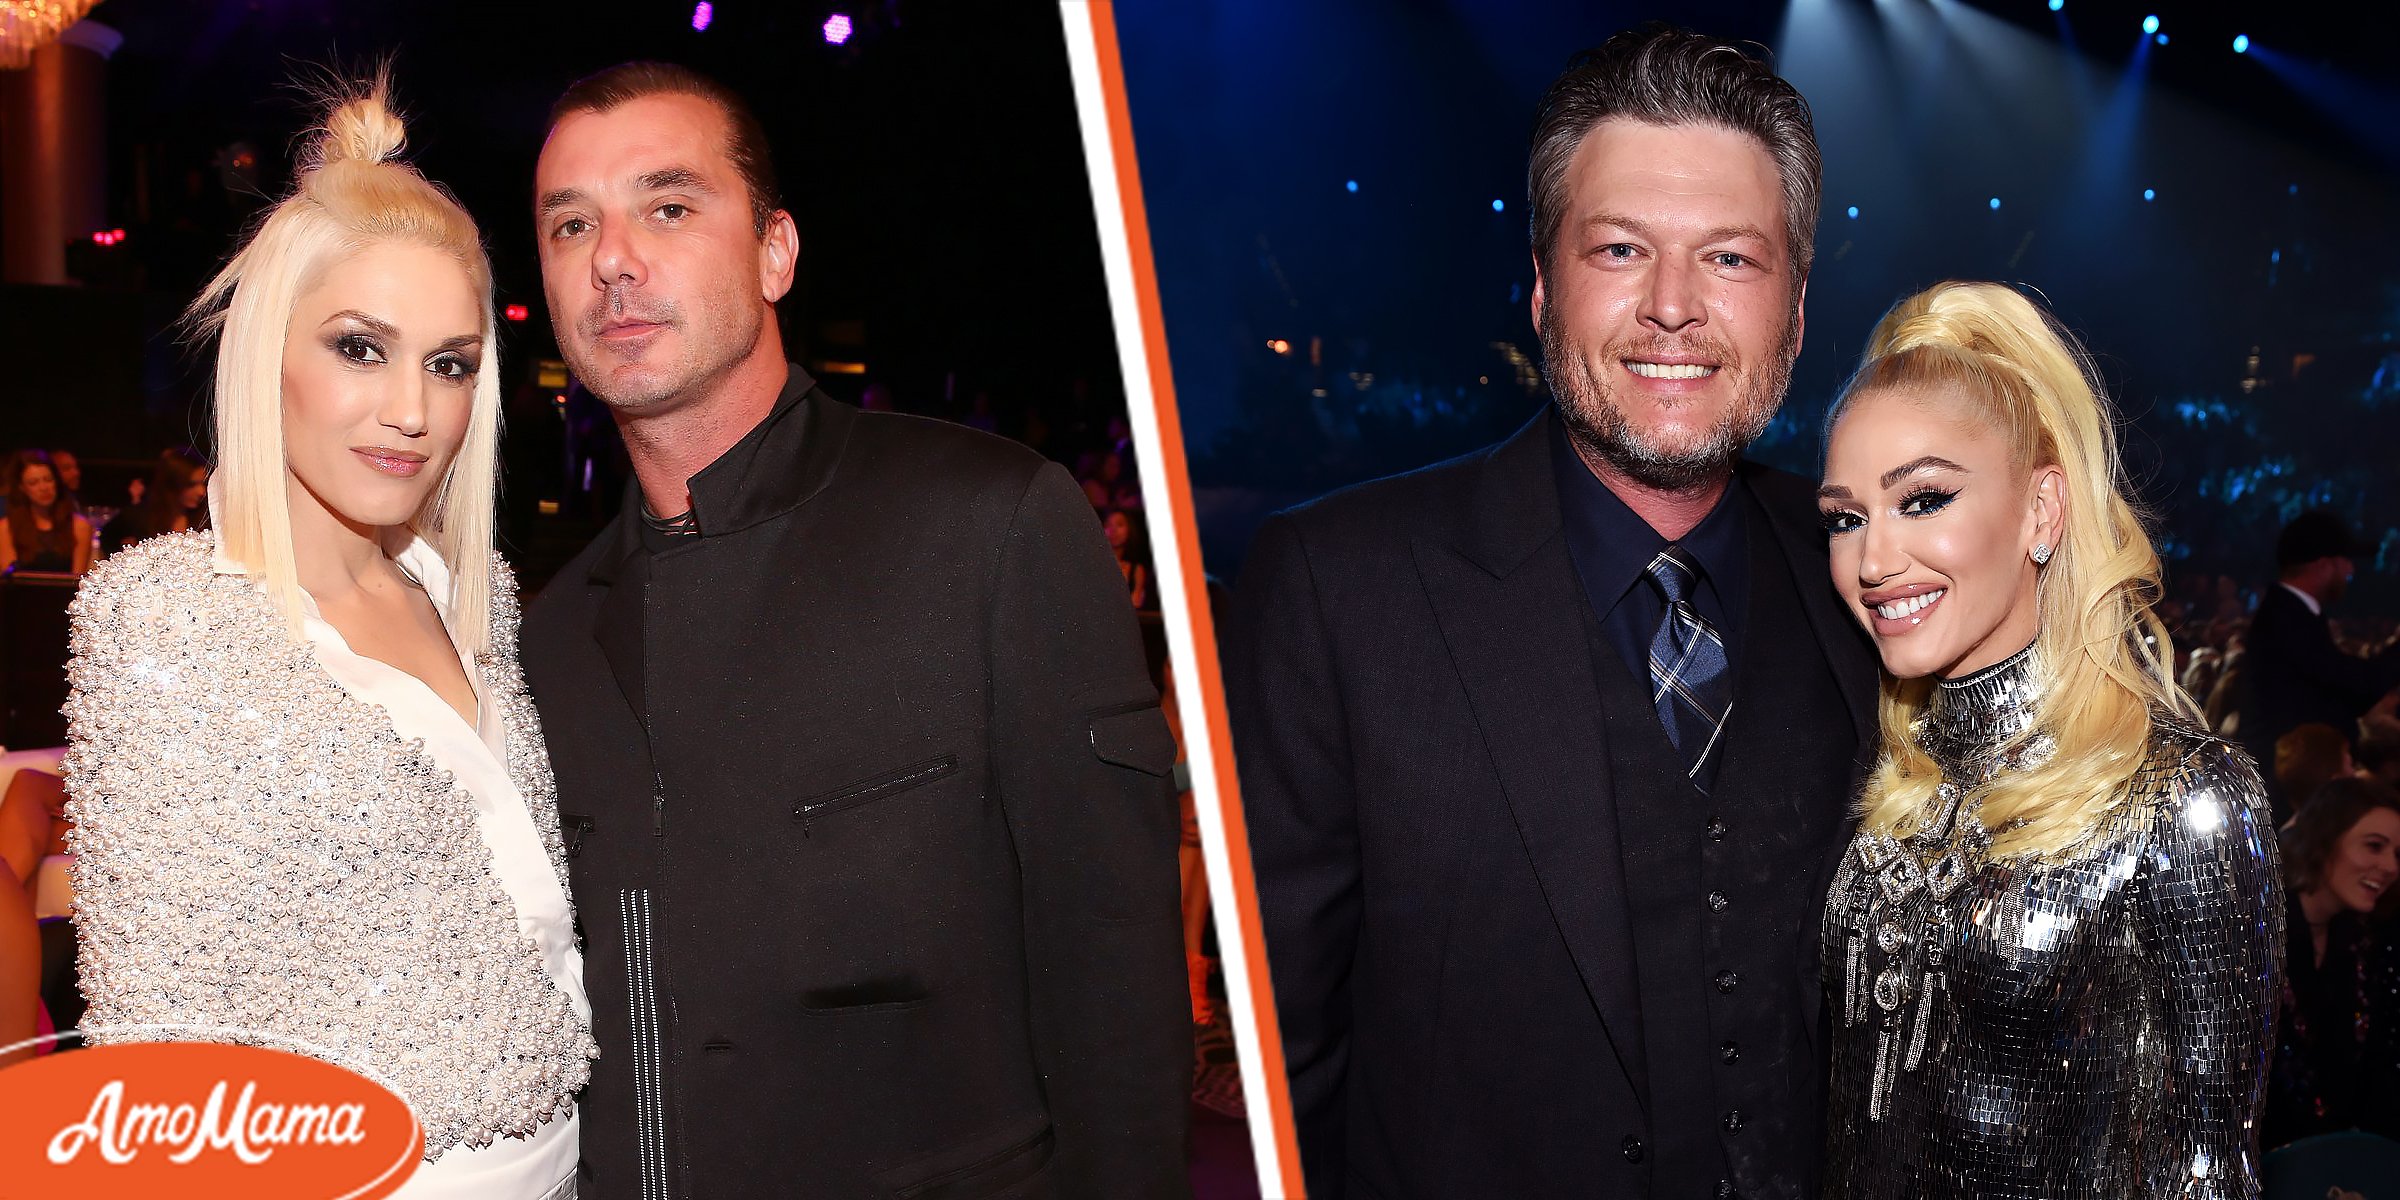 Gwen Stefani and Gavin Rossdale [left], Gwen Stefani and Blake Shelton at an event [right]  | Photo: Getty Images